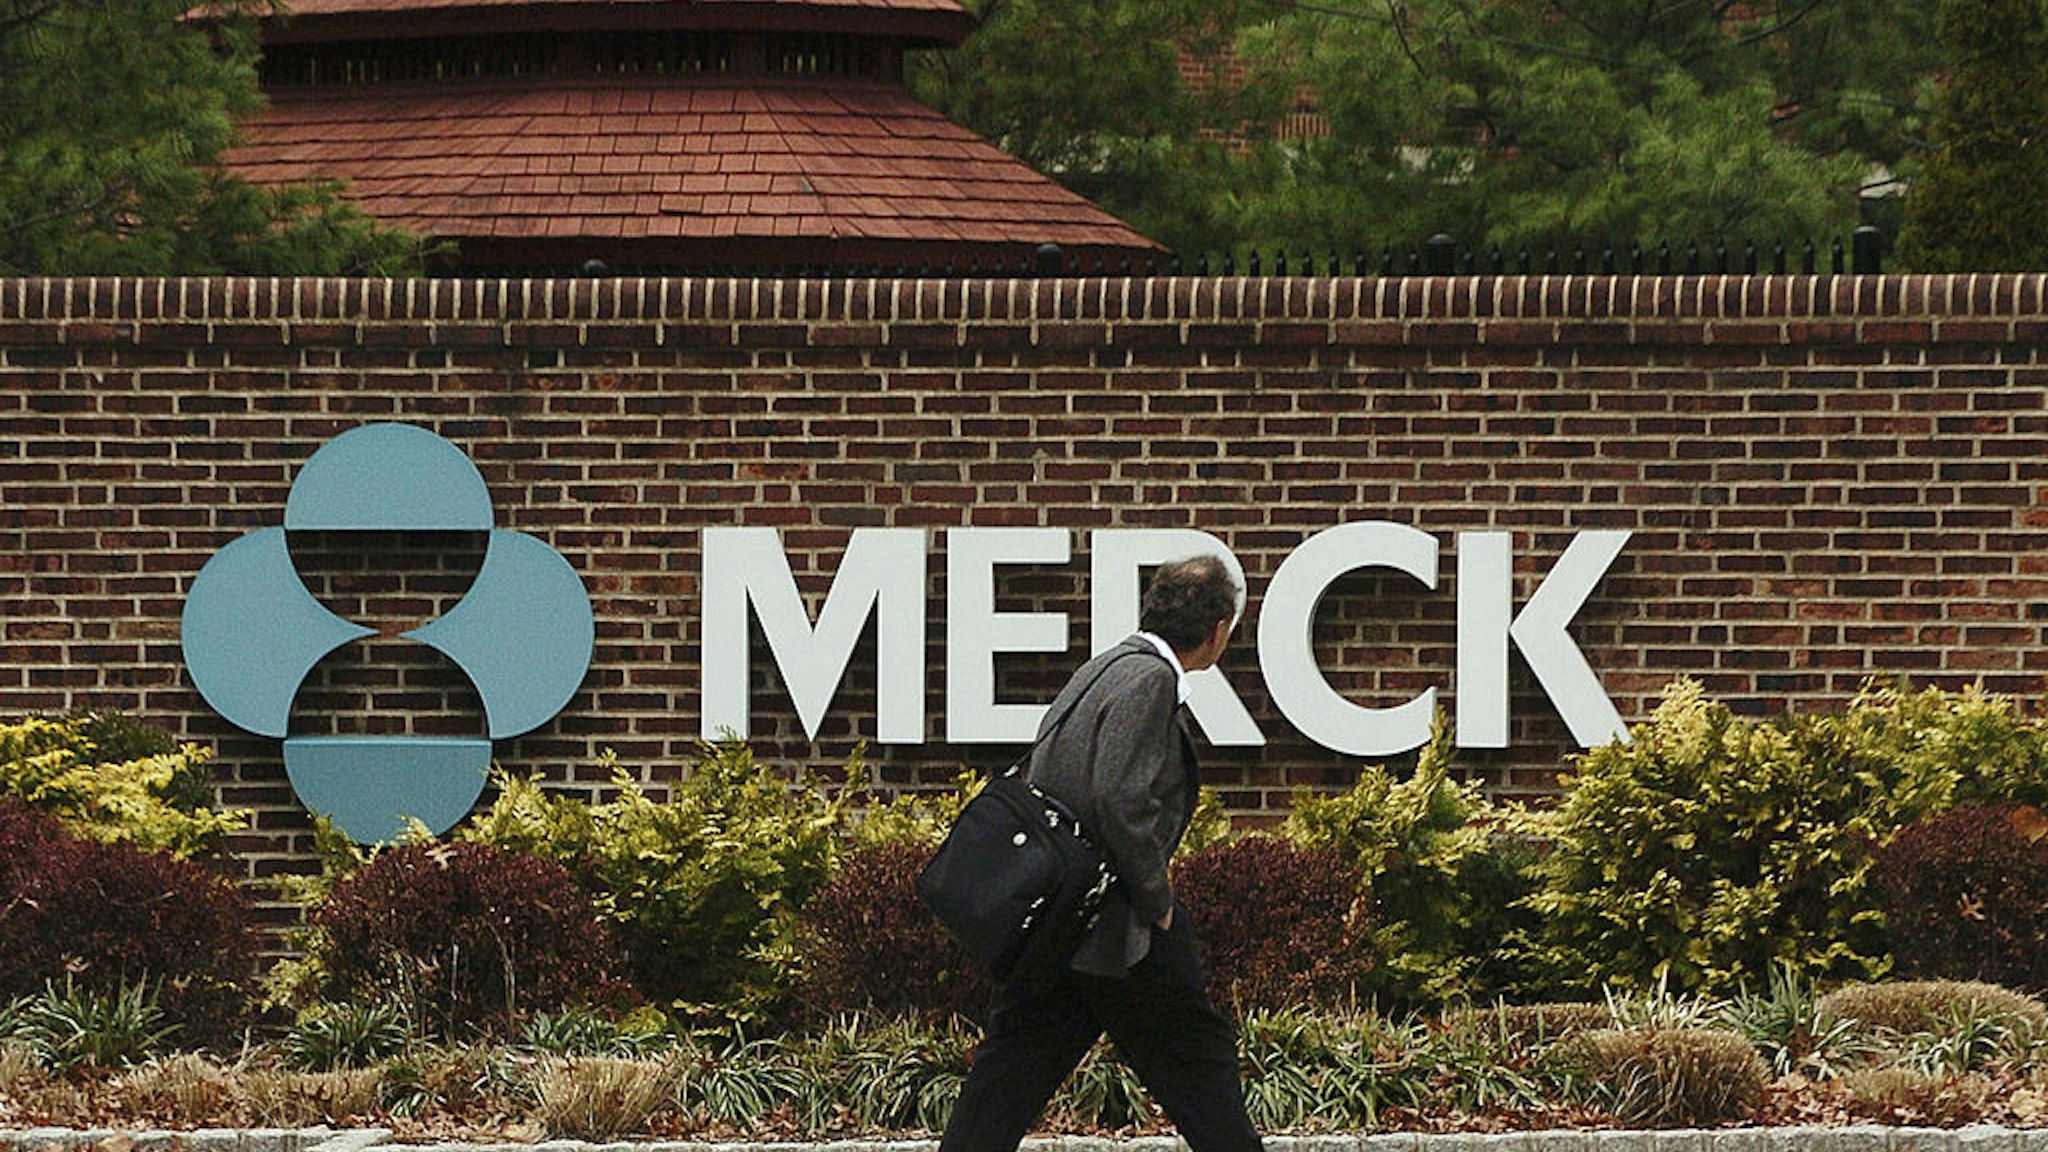 RAHWAY, NJ - NOVEMBER 29: A man walks by a sign at a Merck plant November 29, 2005 in Rahway, New Jersey. U.S. pharmaceutical giant Merck, announced plans to cut some 7,000 jobs, or 11 percent of its global workforce, by the end of 2008. (Photo by Marko Georgiev/Getty Images)